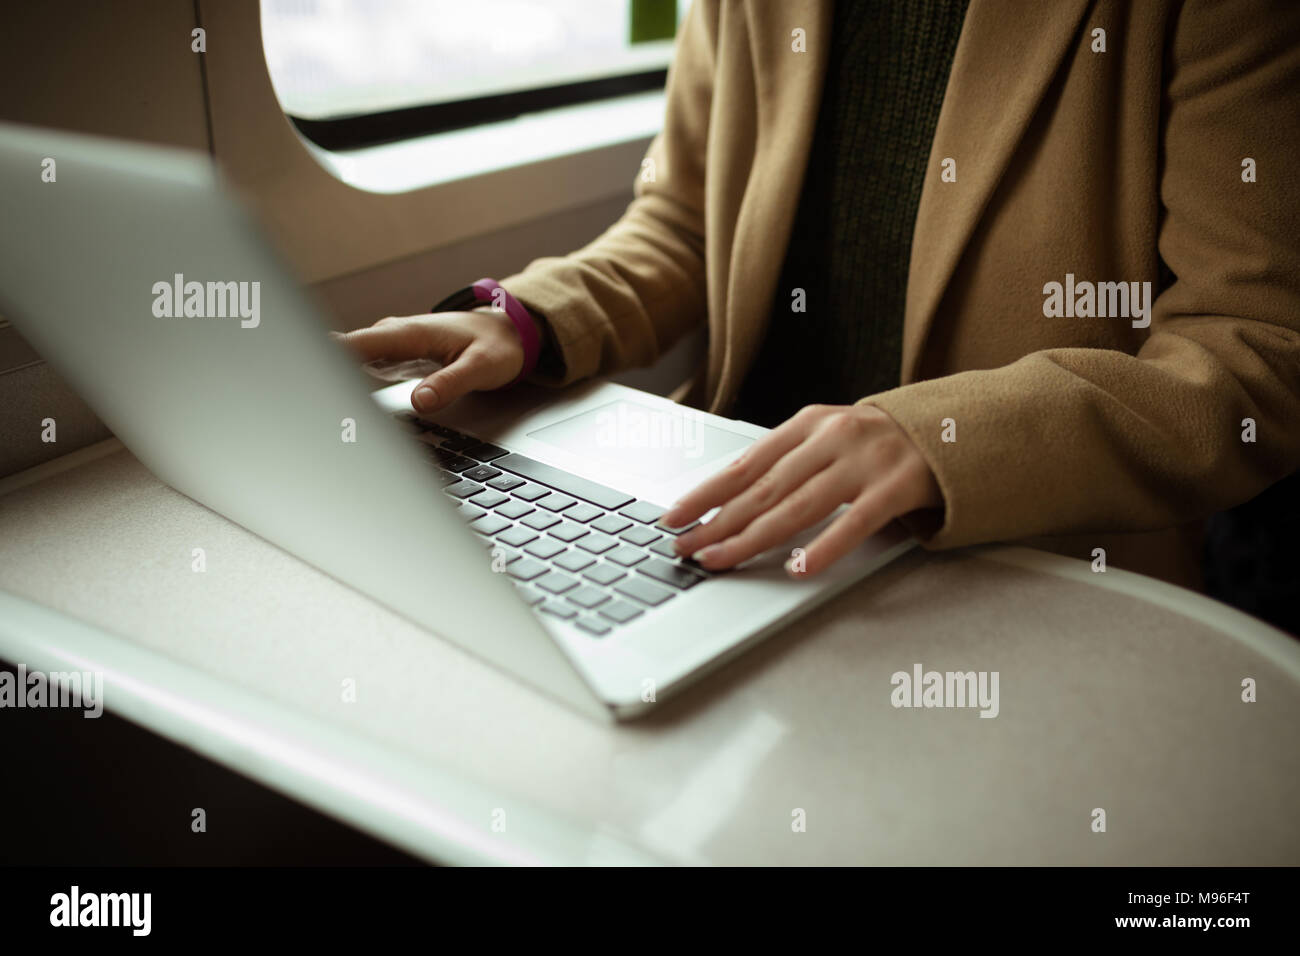 Red hair young woman using her laptop in train Stock Photo